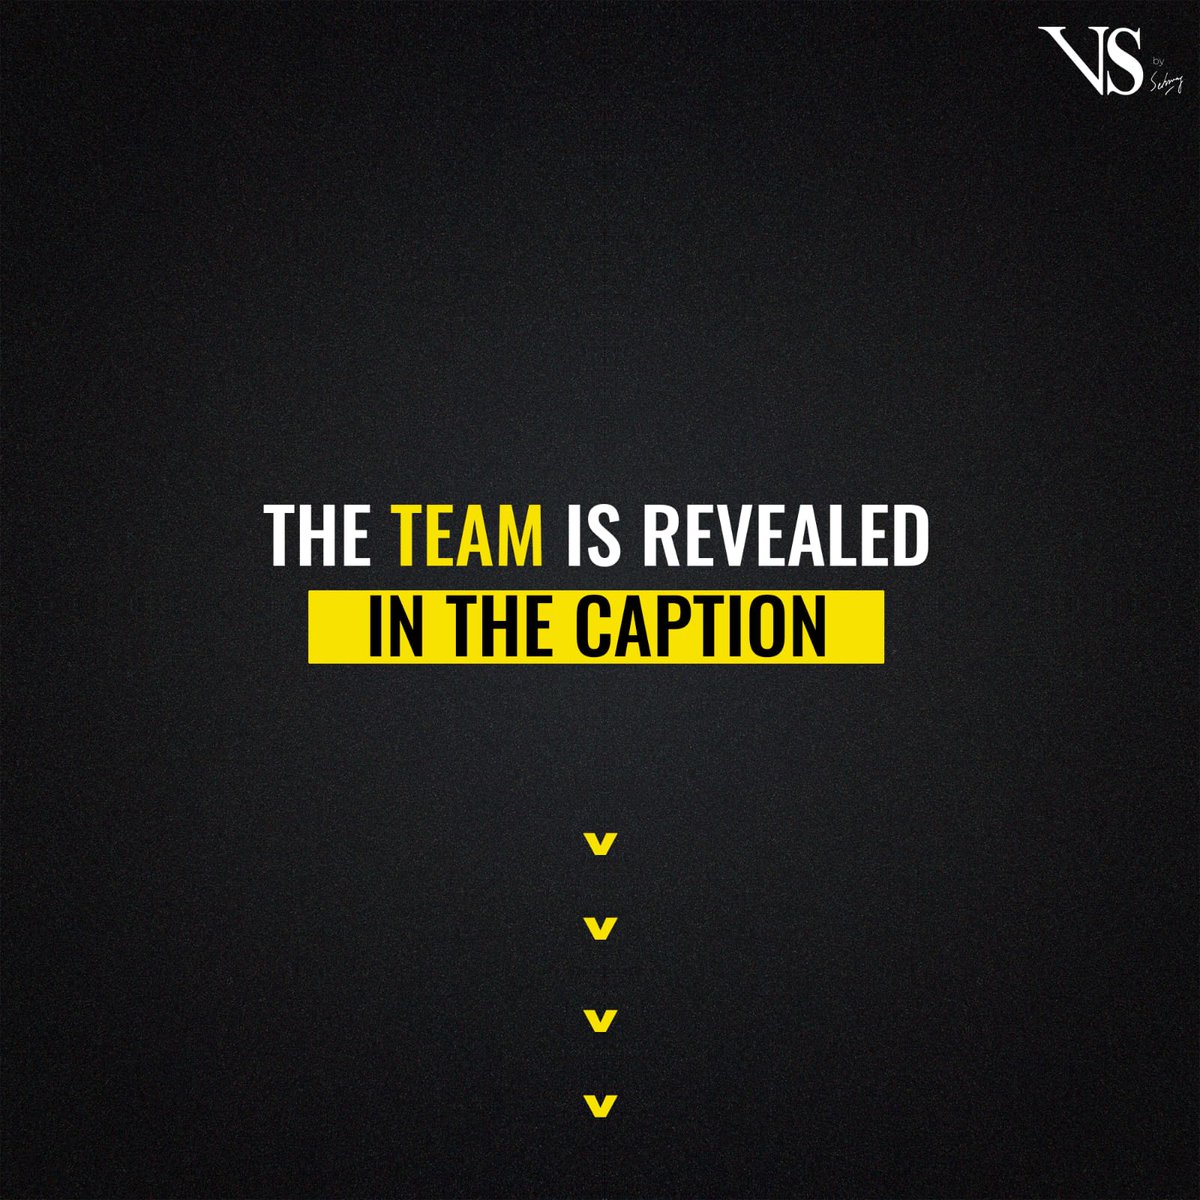 Tap to know
-
-
-

April Fool pe itna toh banta hai!

#VSBySehwag #AprilFool #AprilFoolDay #AprilFoolJoke #Uncompromise #HonestPrice #TeamJersey  #AprilFool2024 #Cricket #SportsBrand #TopicalPost #TopicalContent